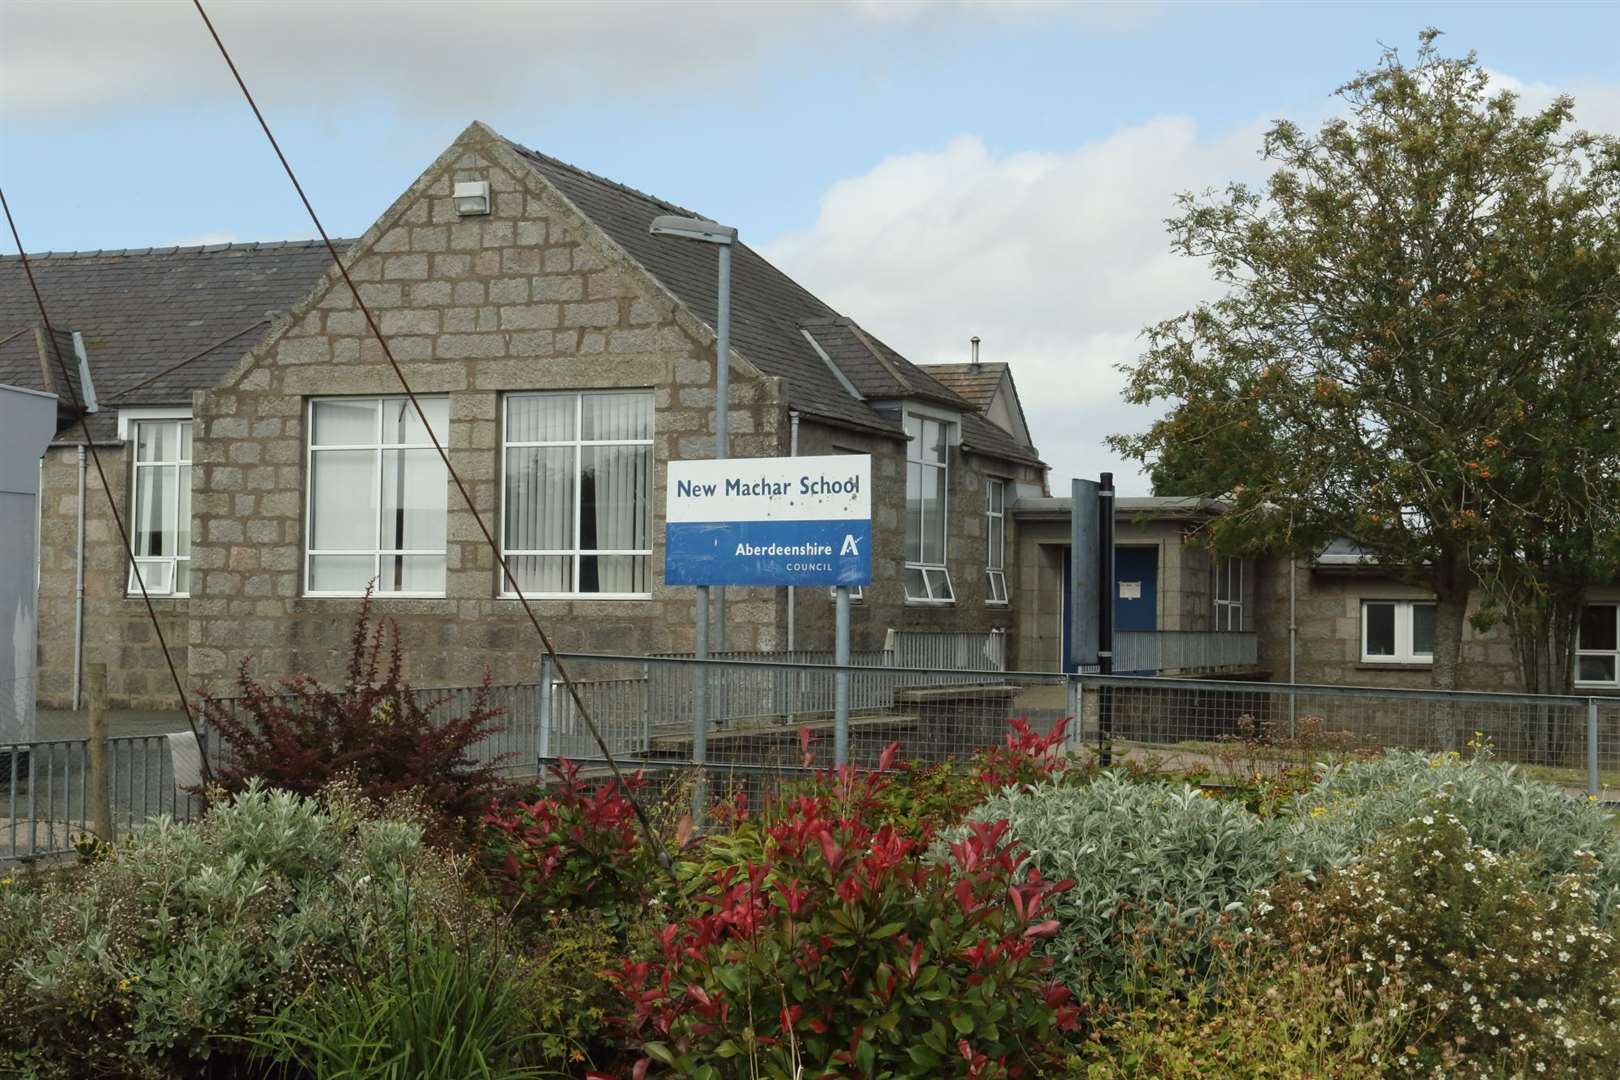 New Machar Primary School is the latest to have its inspection report published.